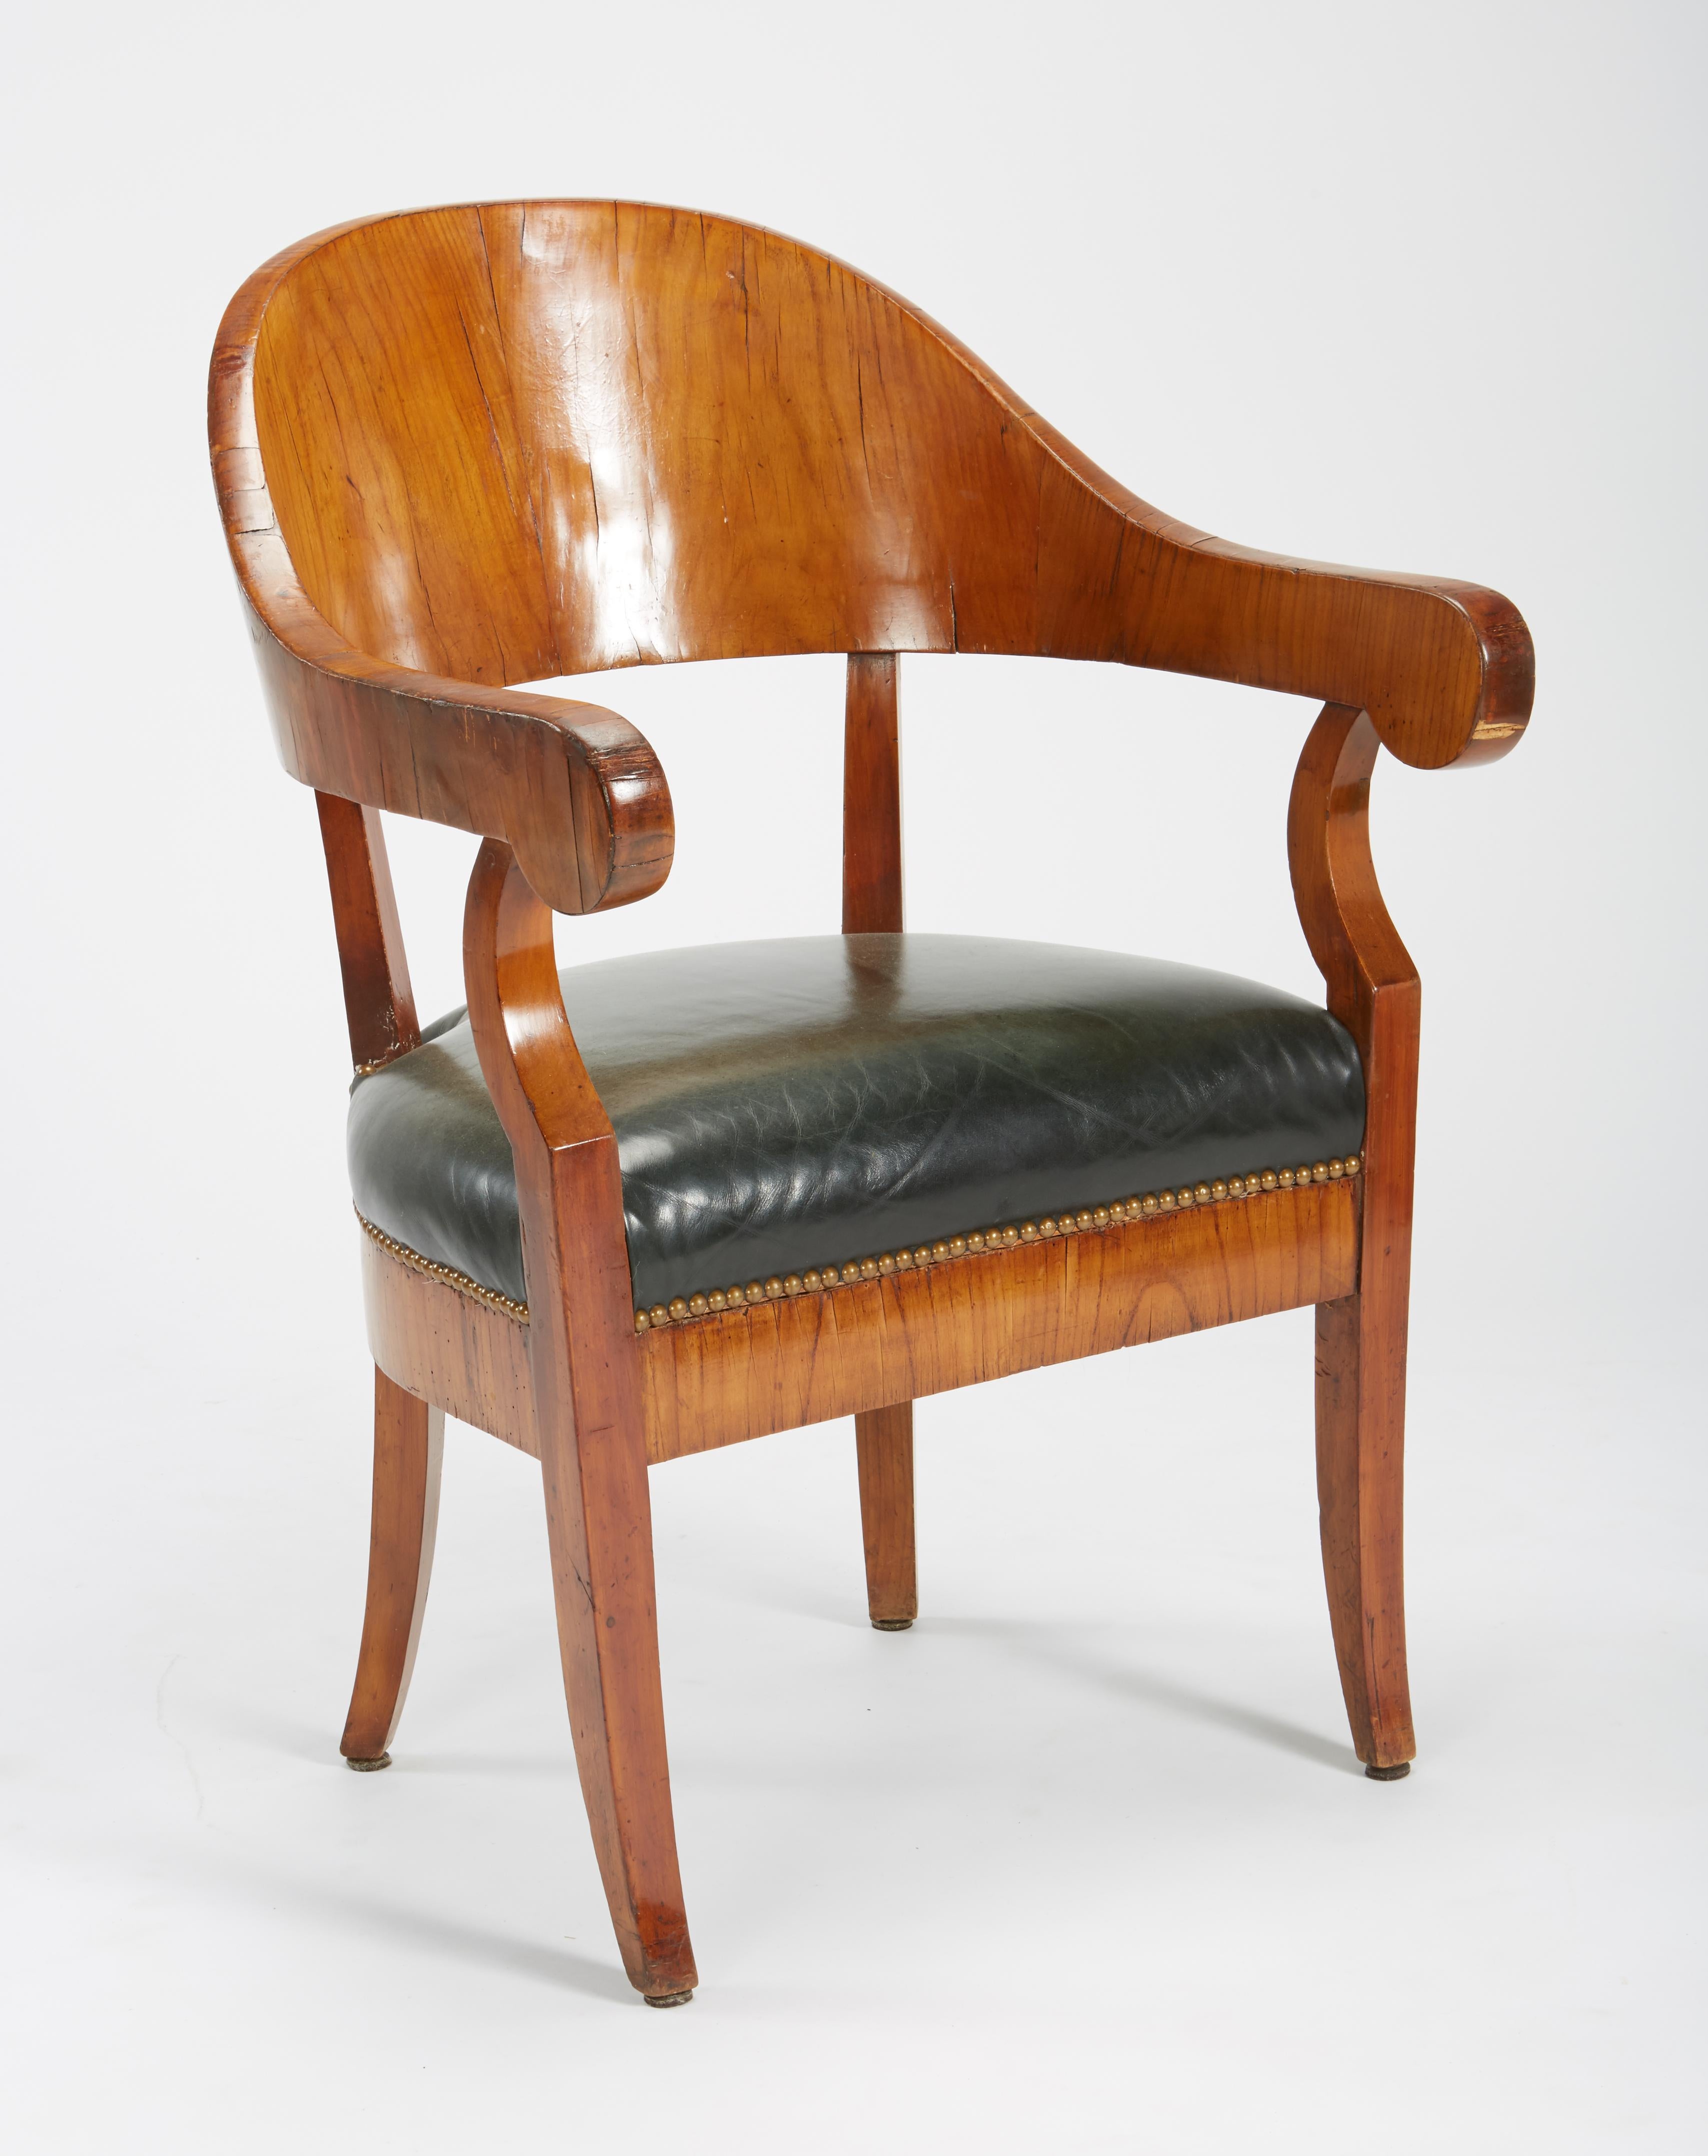 A fine set of six Austro-Hungarian Biedermeier fruitwood chairs, early 19th century, including an associated armchair, each sidechair with a crescent-shaped crest rail outlined in ebony, the verde antico and parcel gilt splat carved with a torch